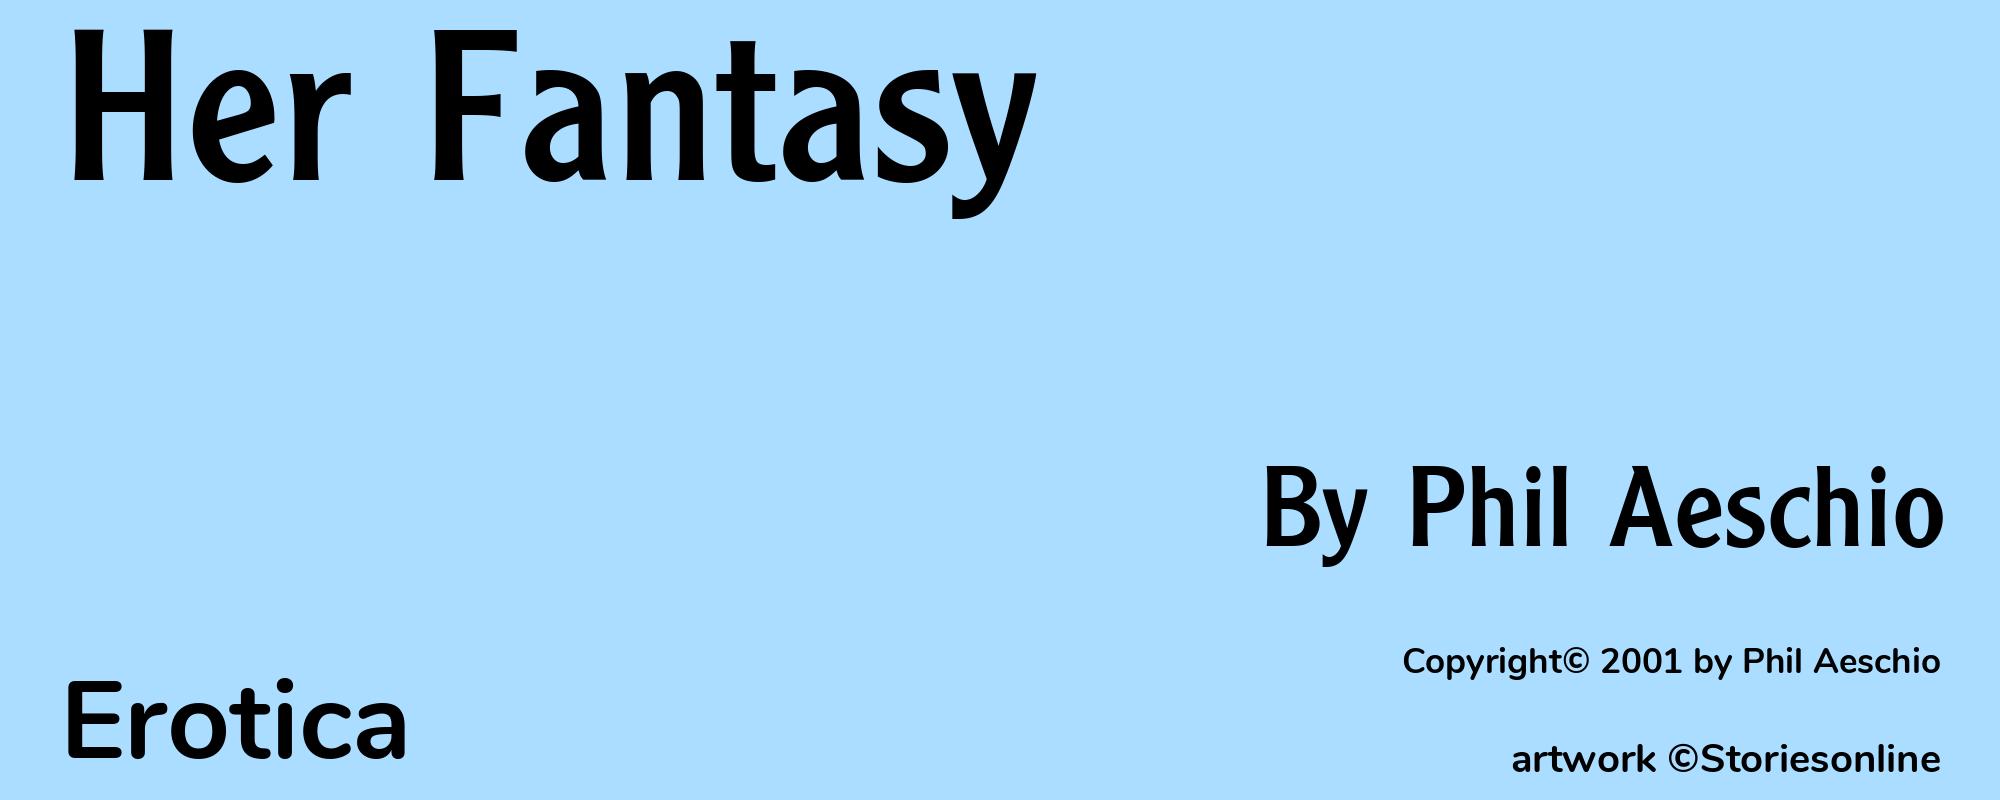 Her Fantasy - Cover